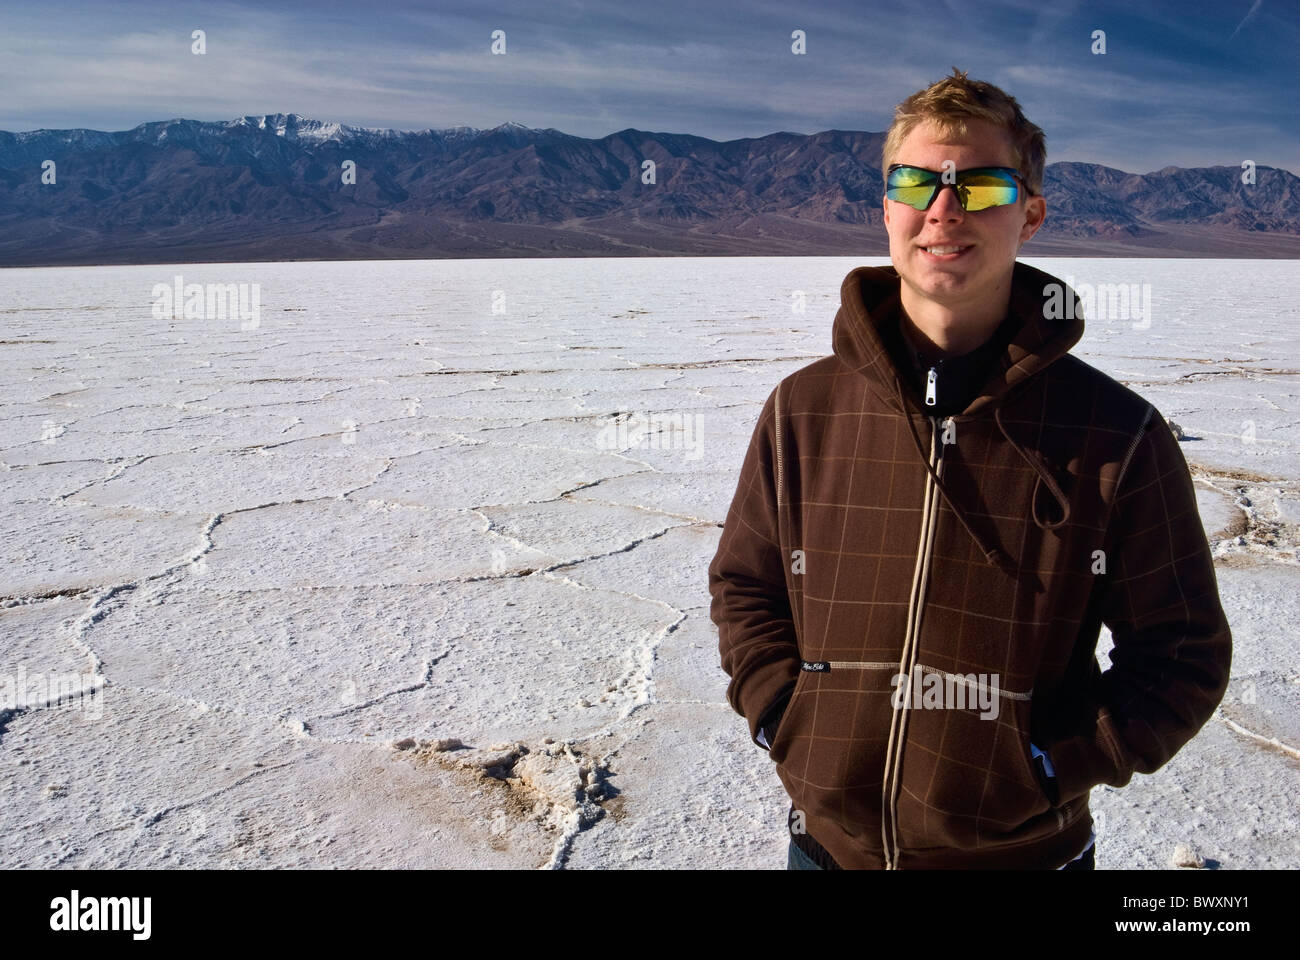 Teenager hiker at Salt Flats in Badwater area, winter, Death Valley, California, USA Stock Photo